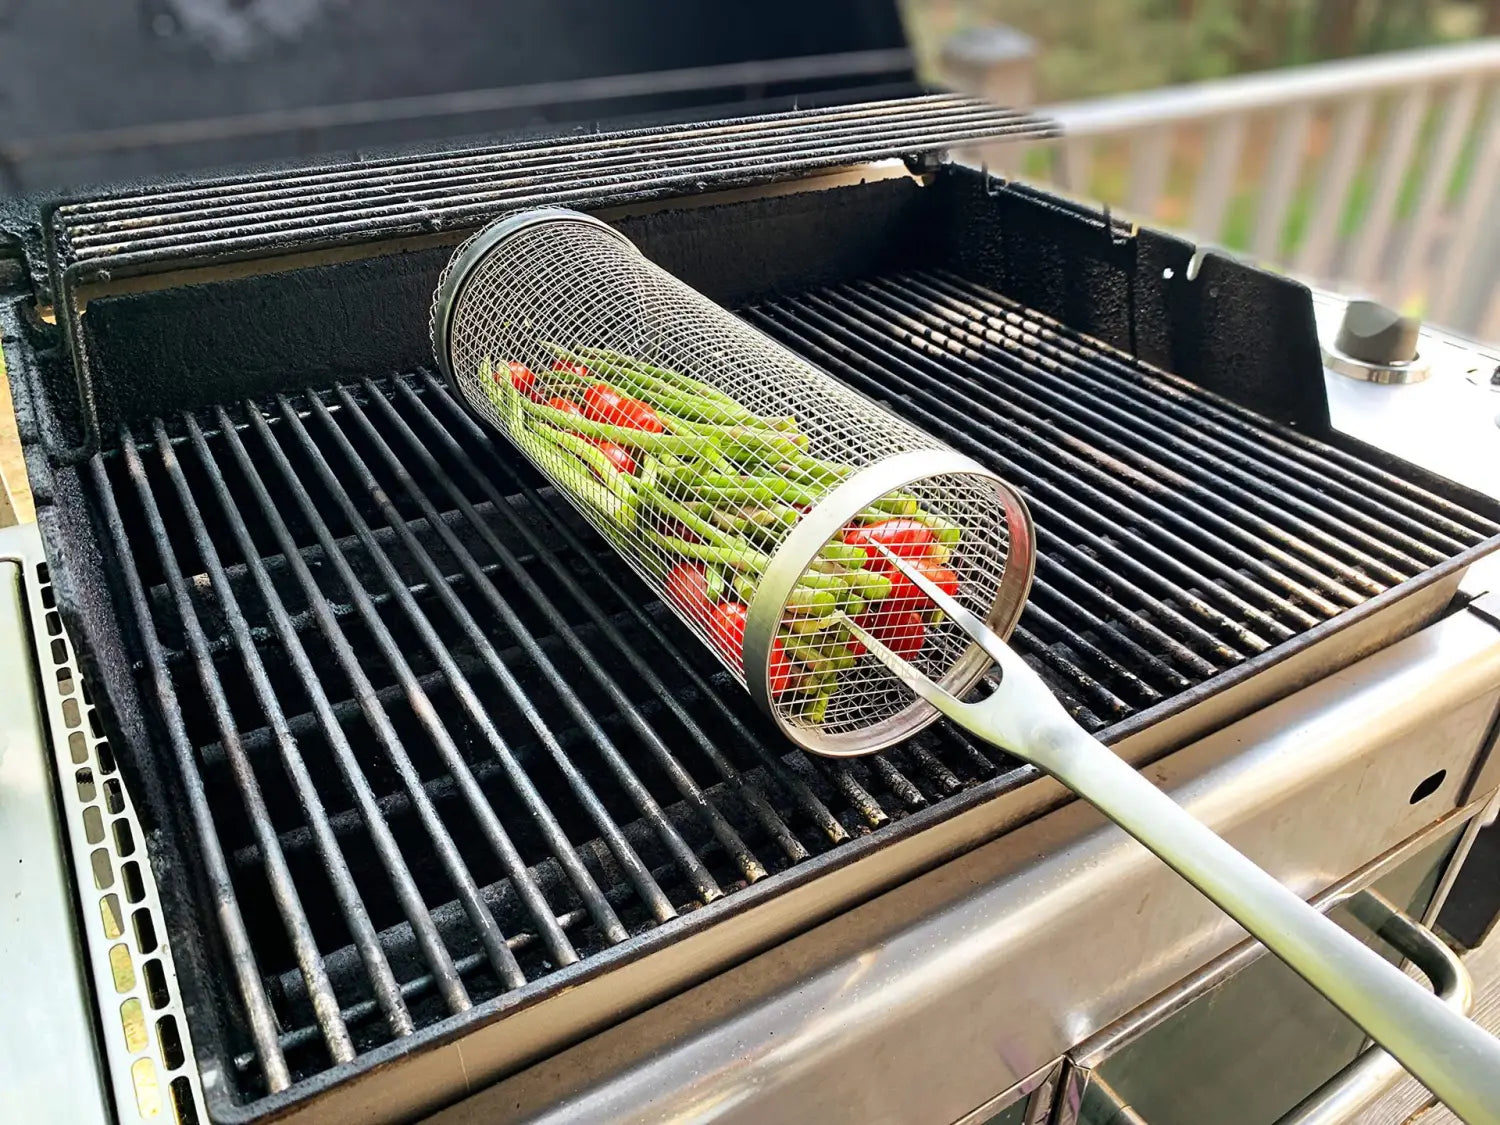 Stainless Steel Grilling Basket for BBQ and Camping